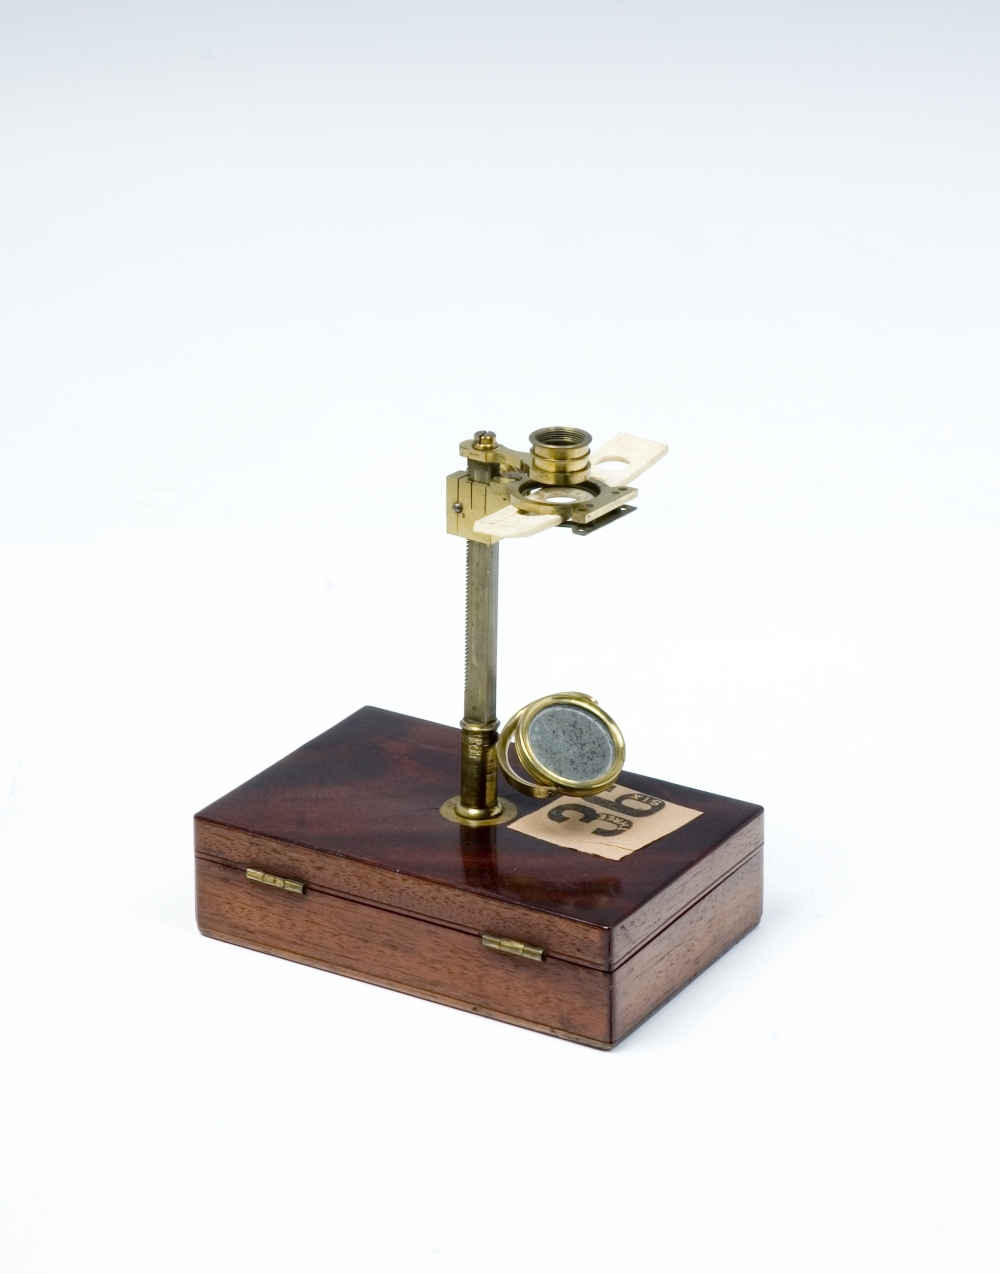 preview image for Simple Microscope, English, c. 1840-50